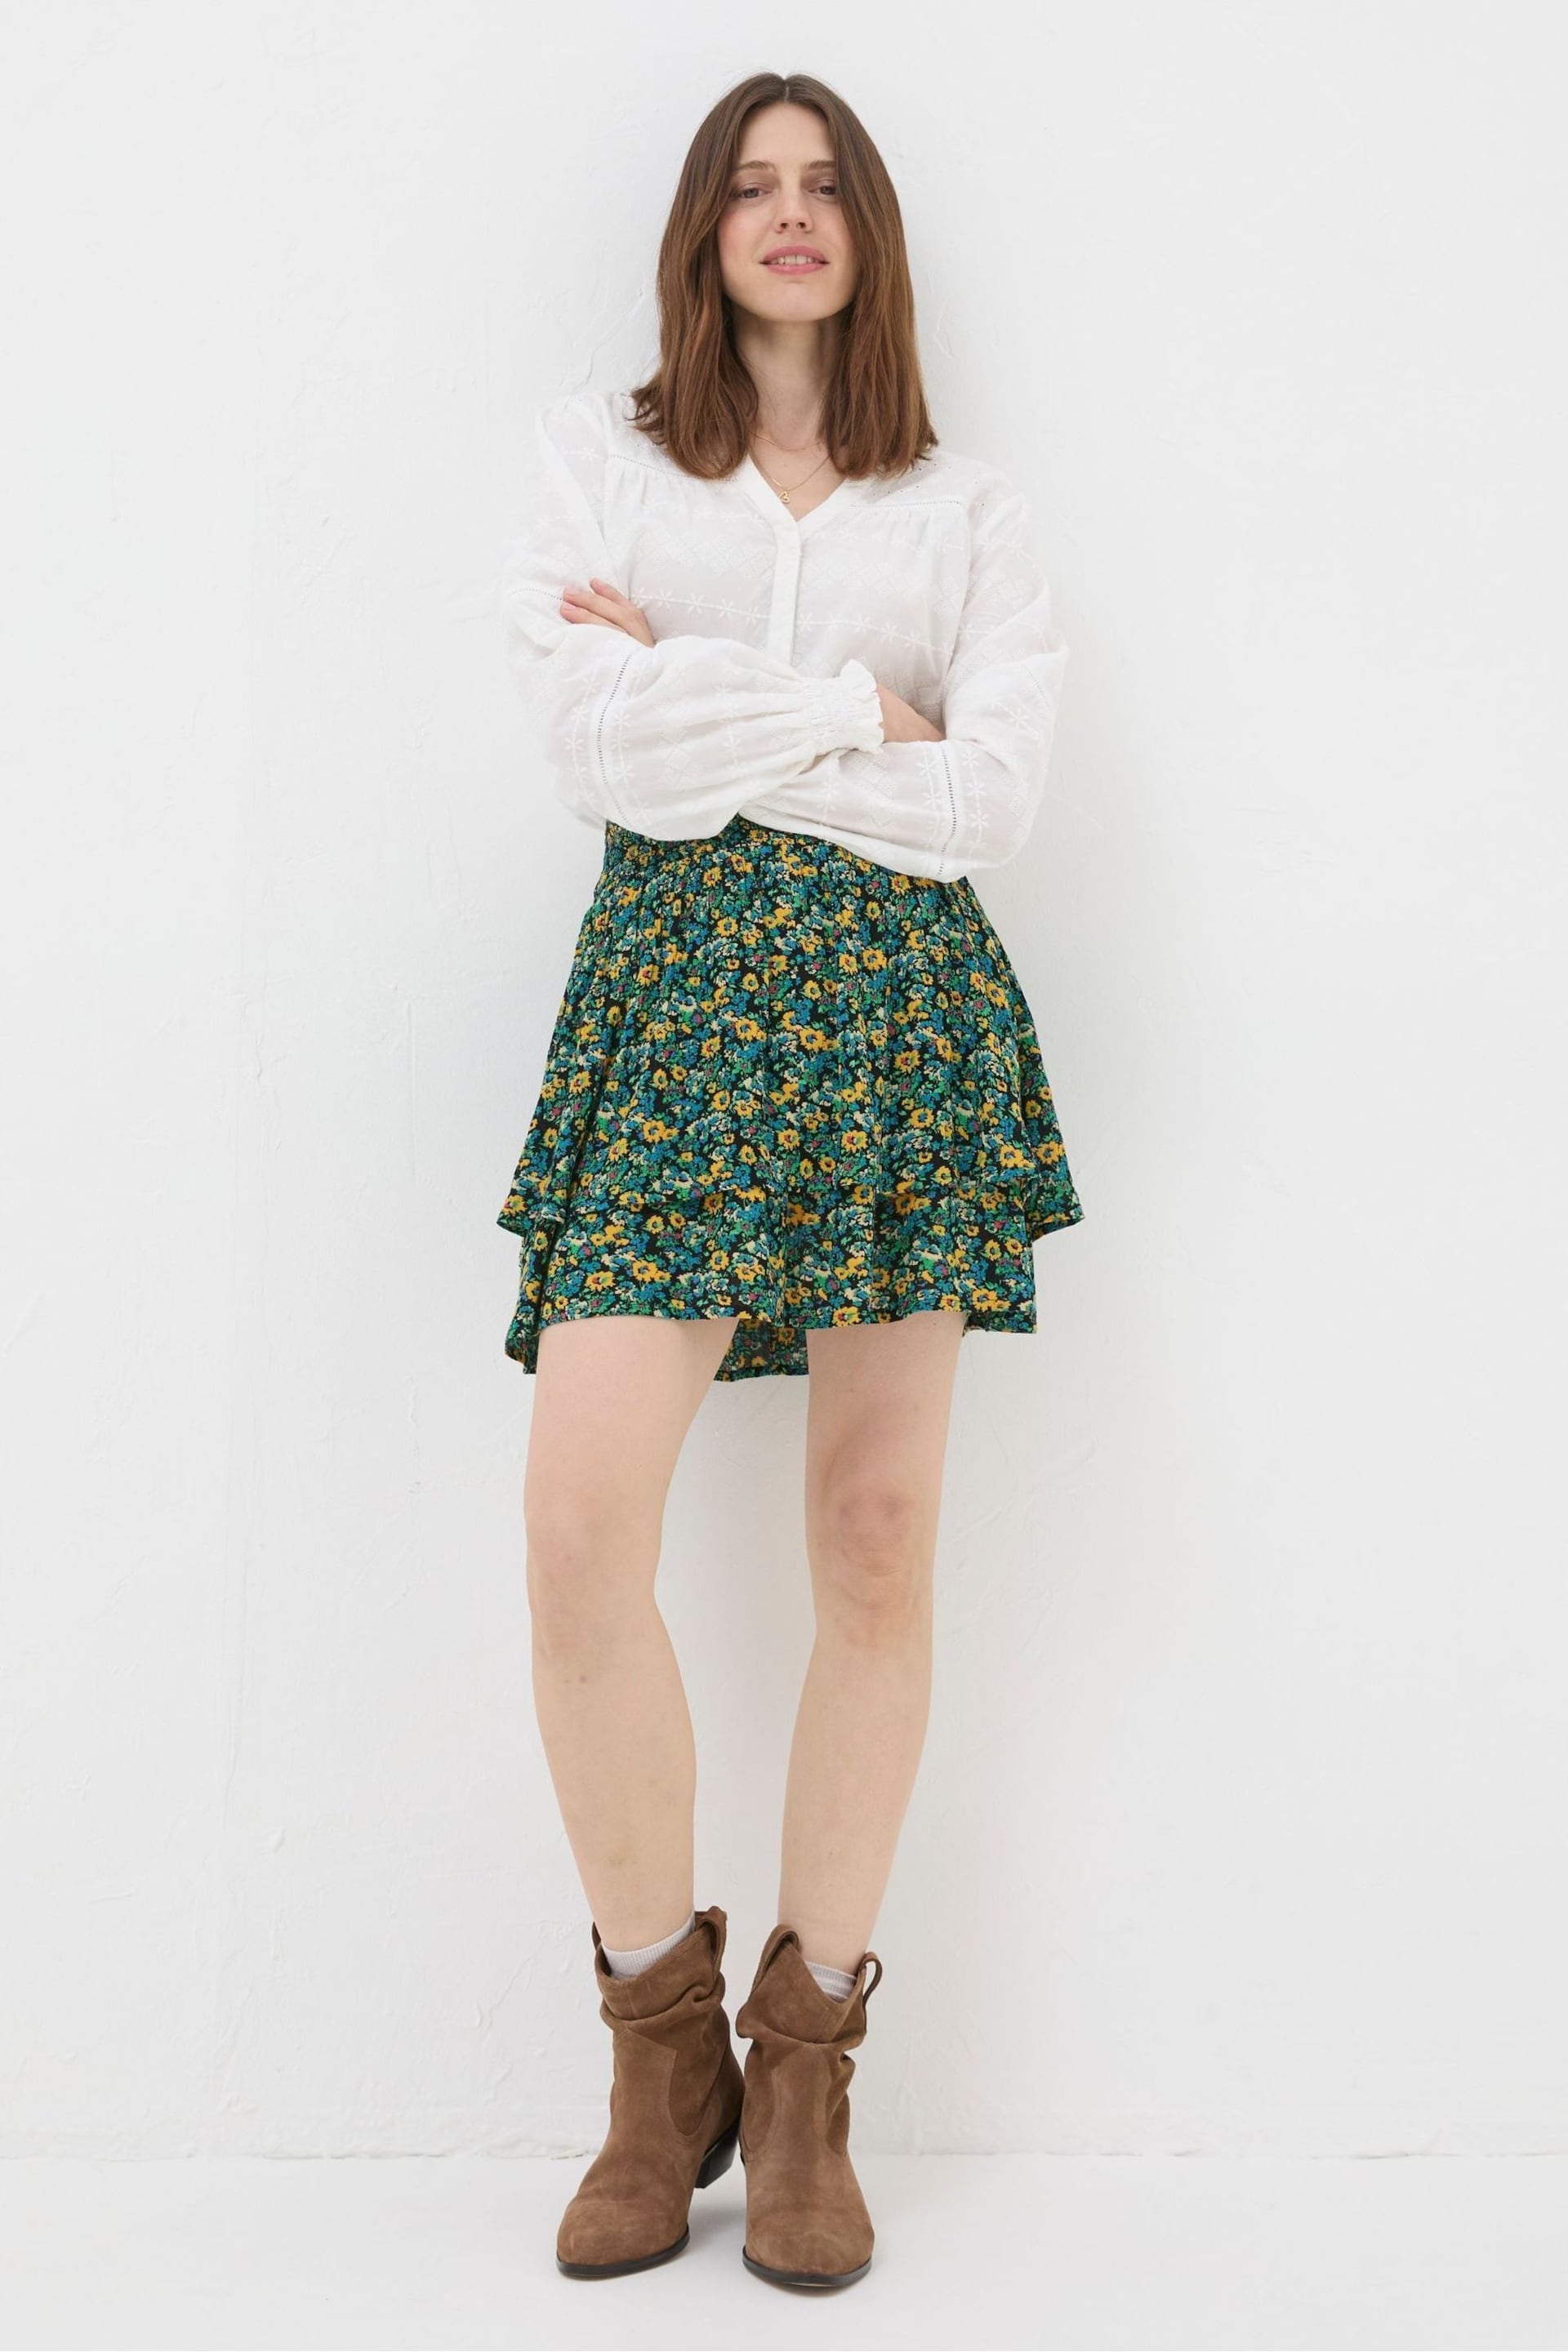 FatFace Green Spring Floral Skirt - Image 4 of 5